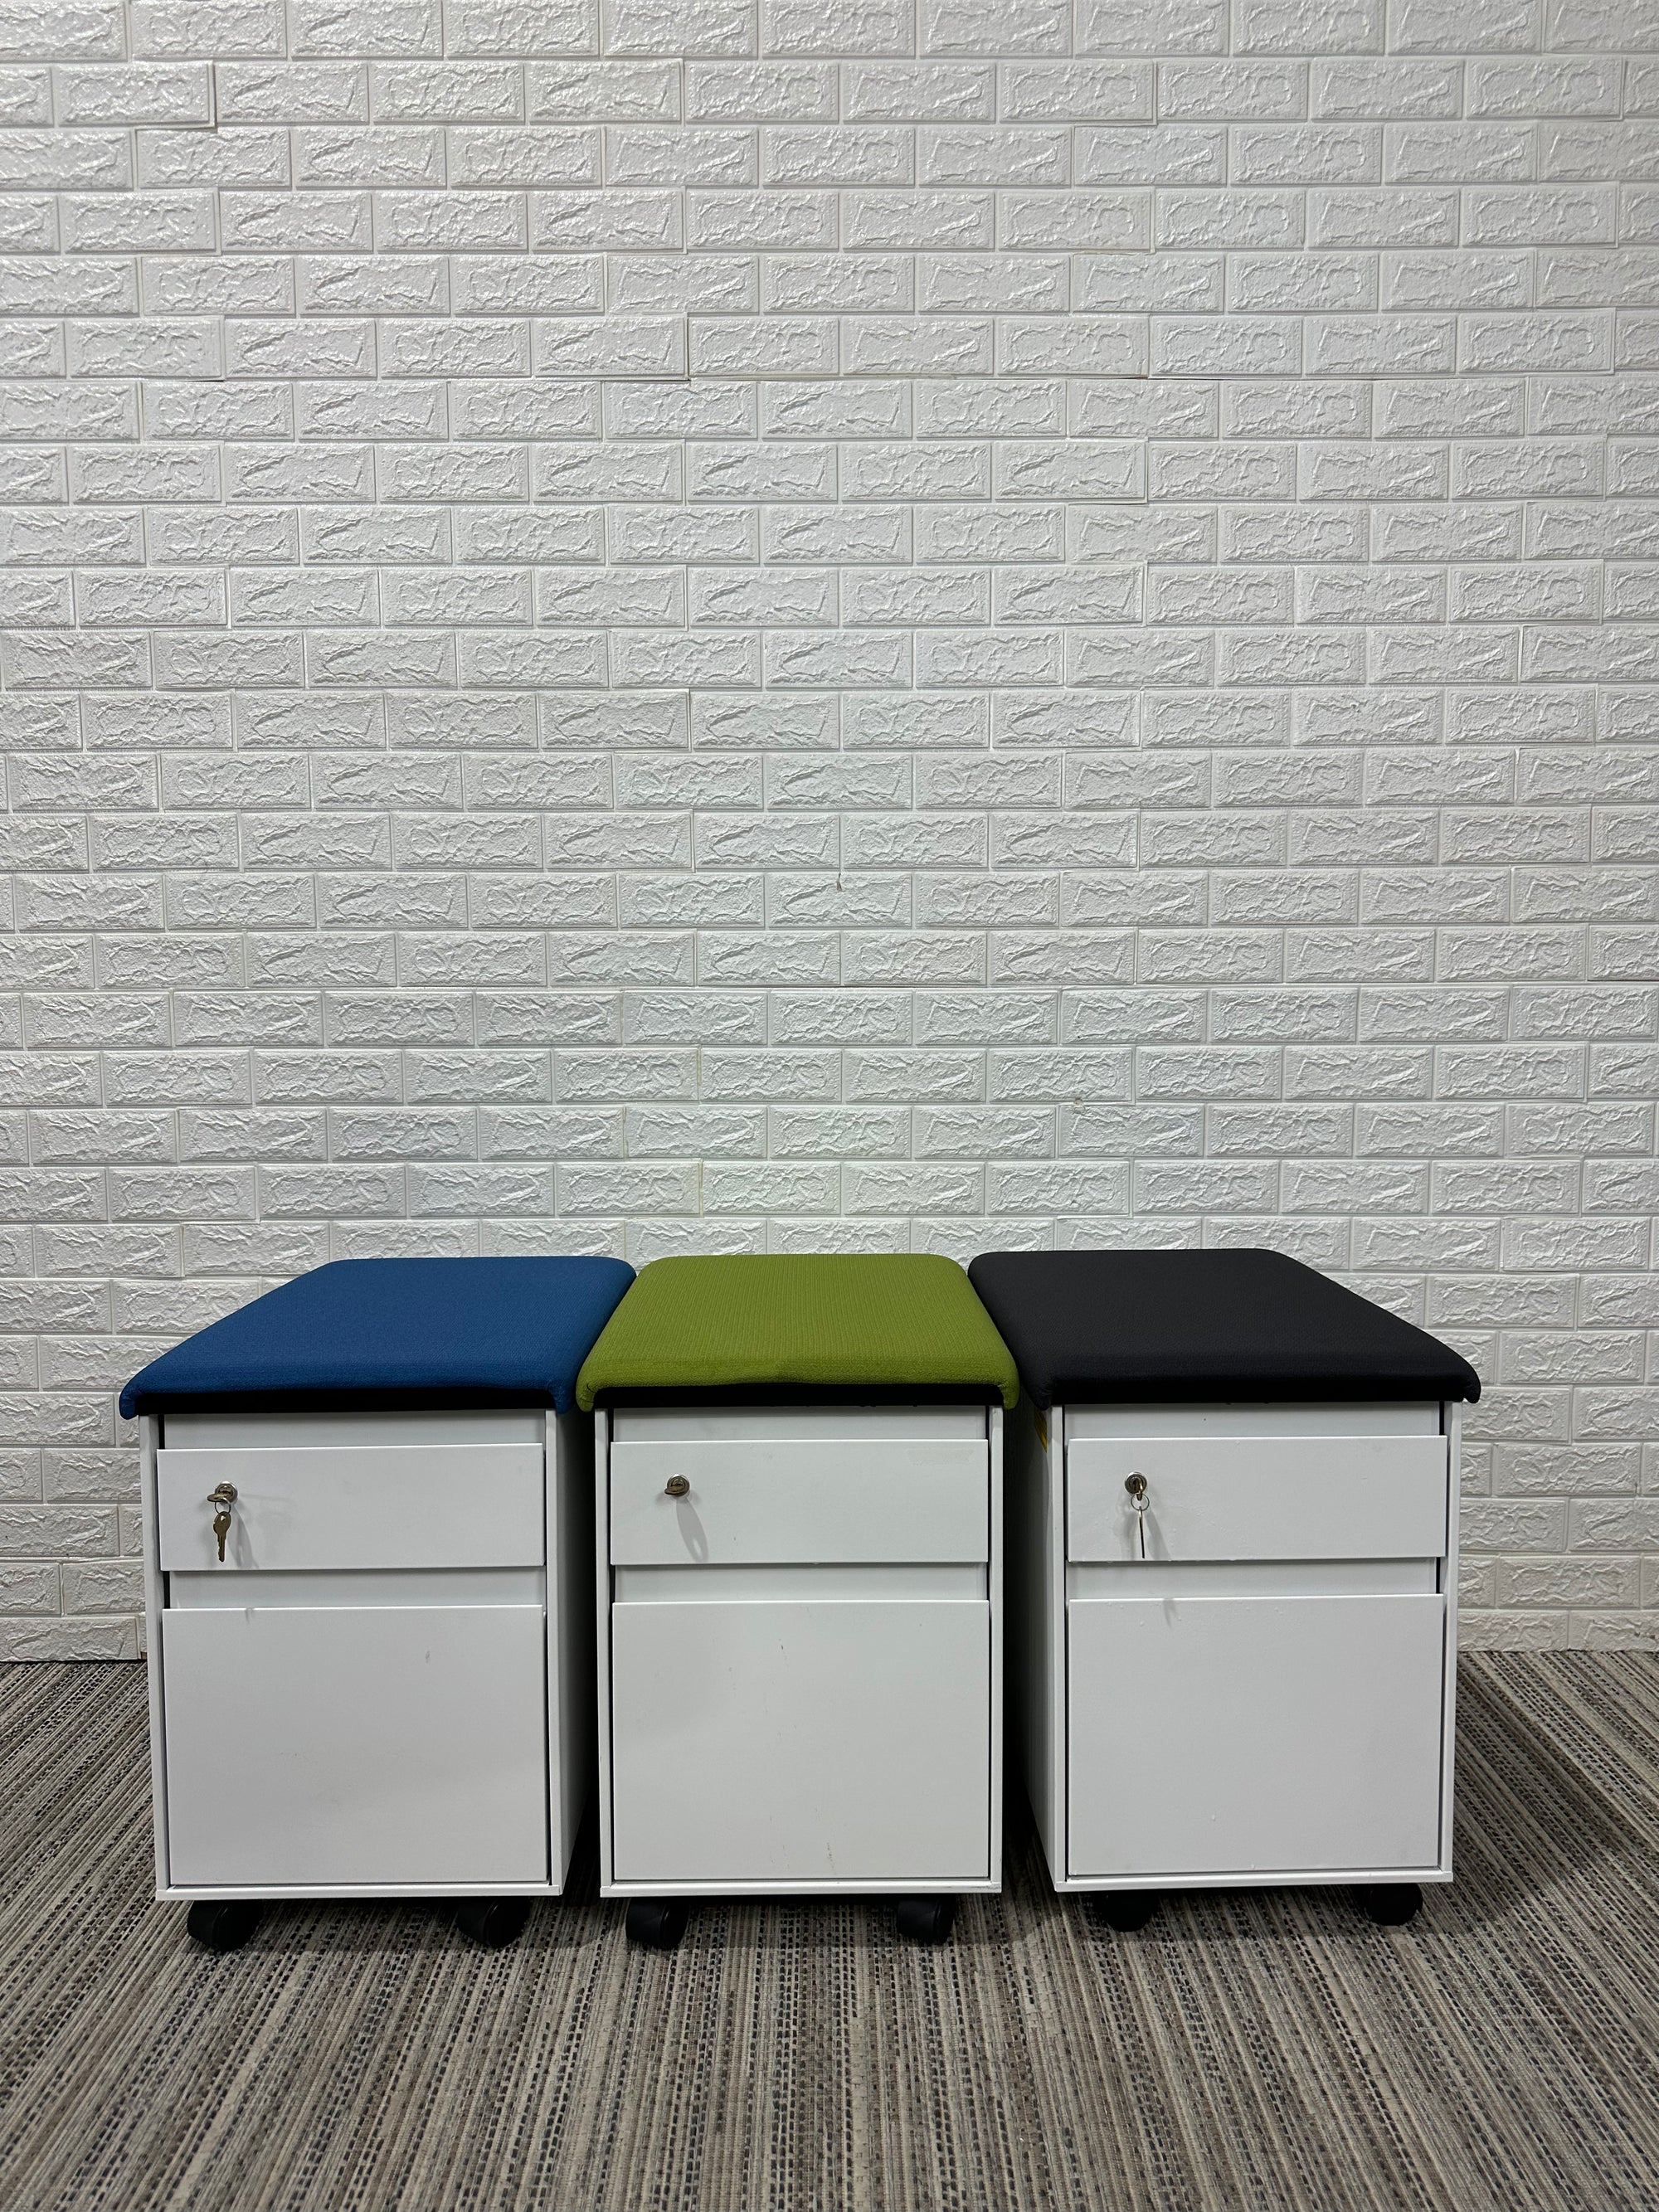 Pre-Owned Steelcase Pedestals - Duckys Office Furniture